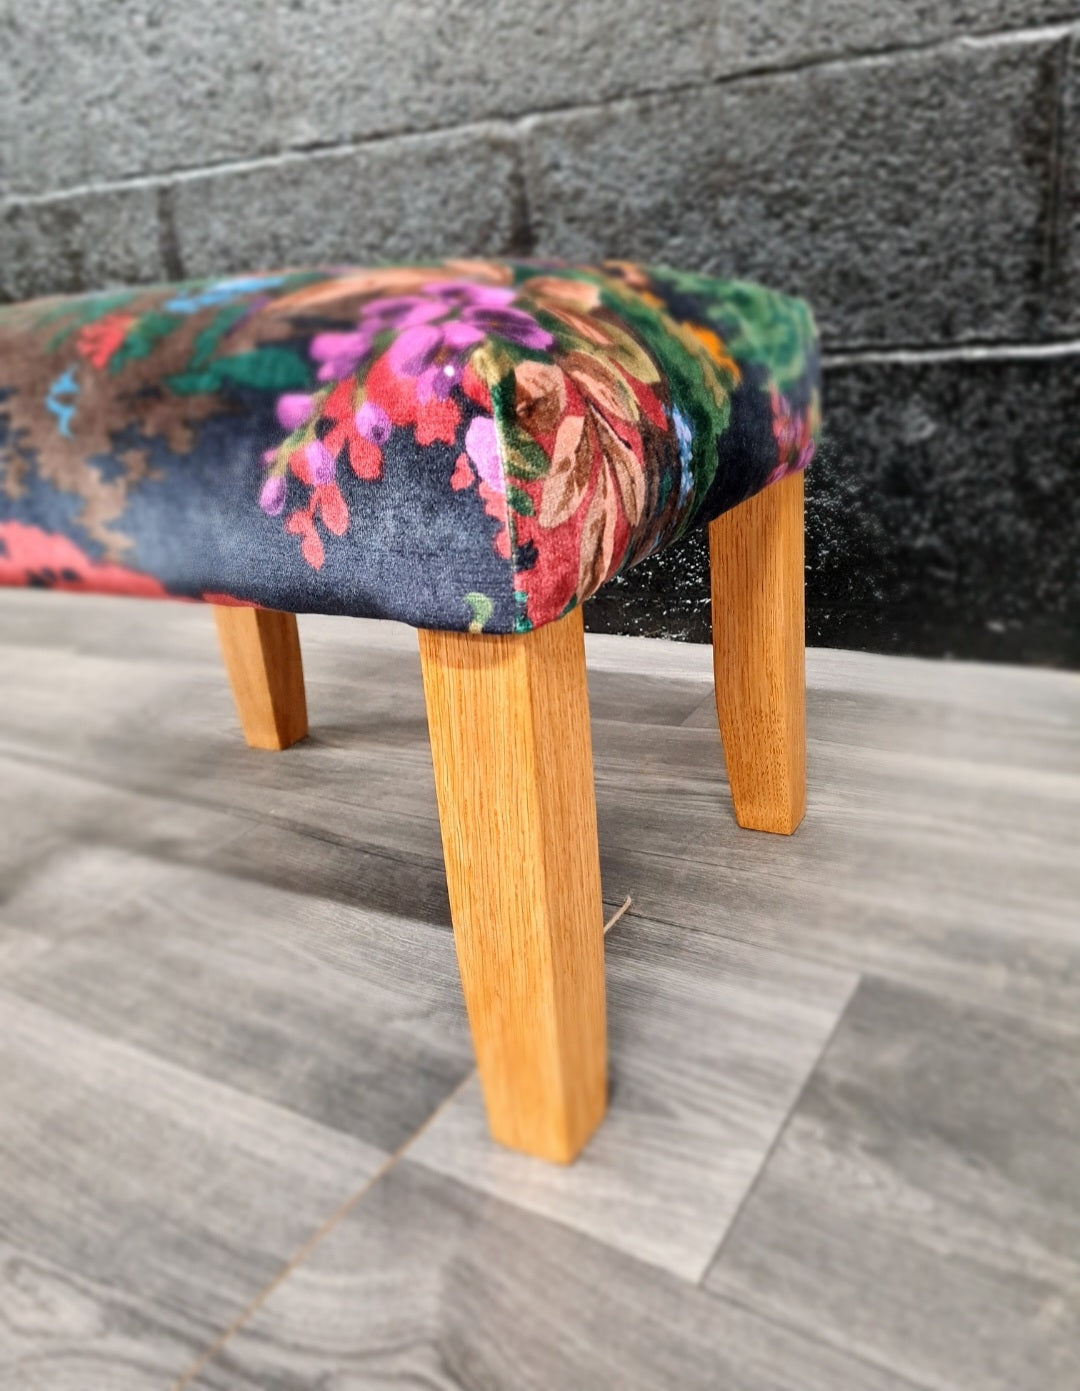 Built your own footstool course